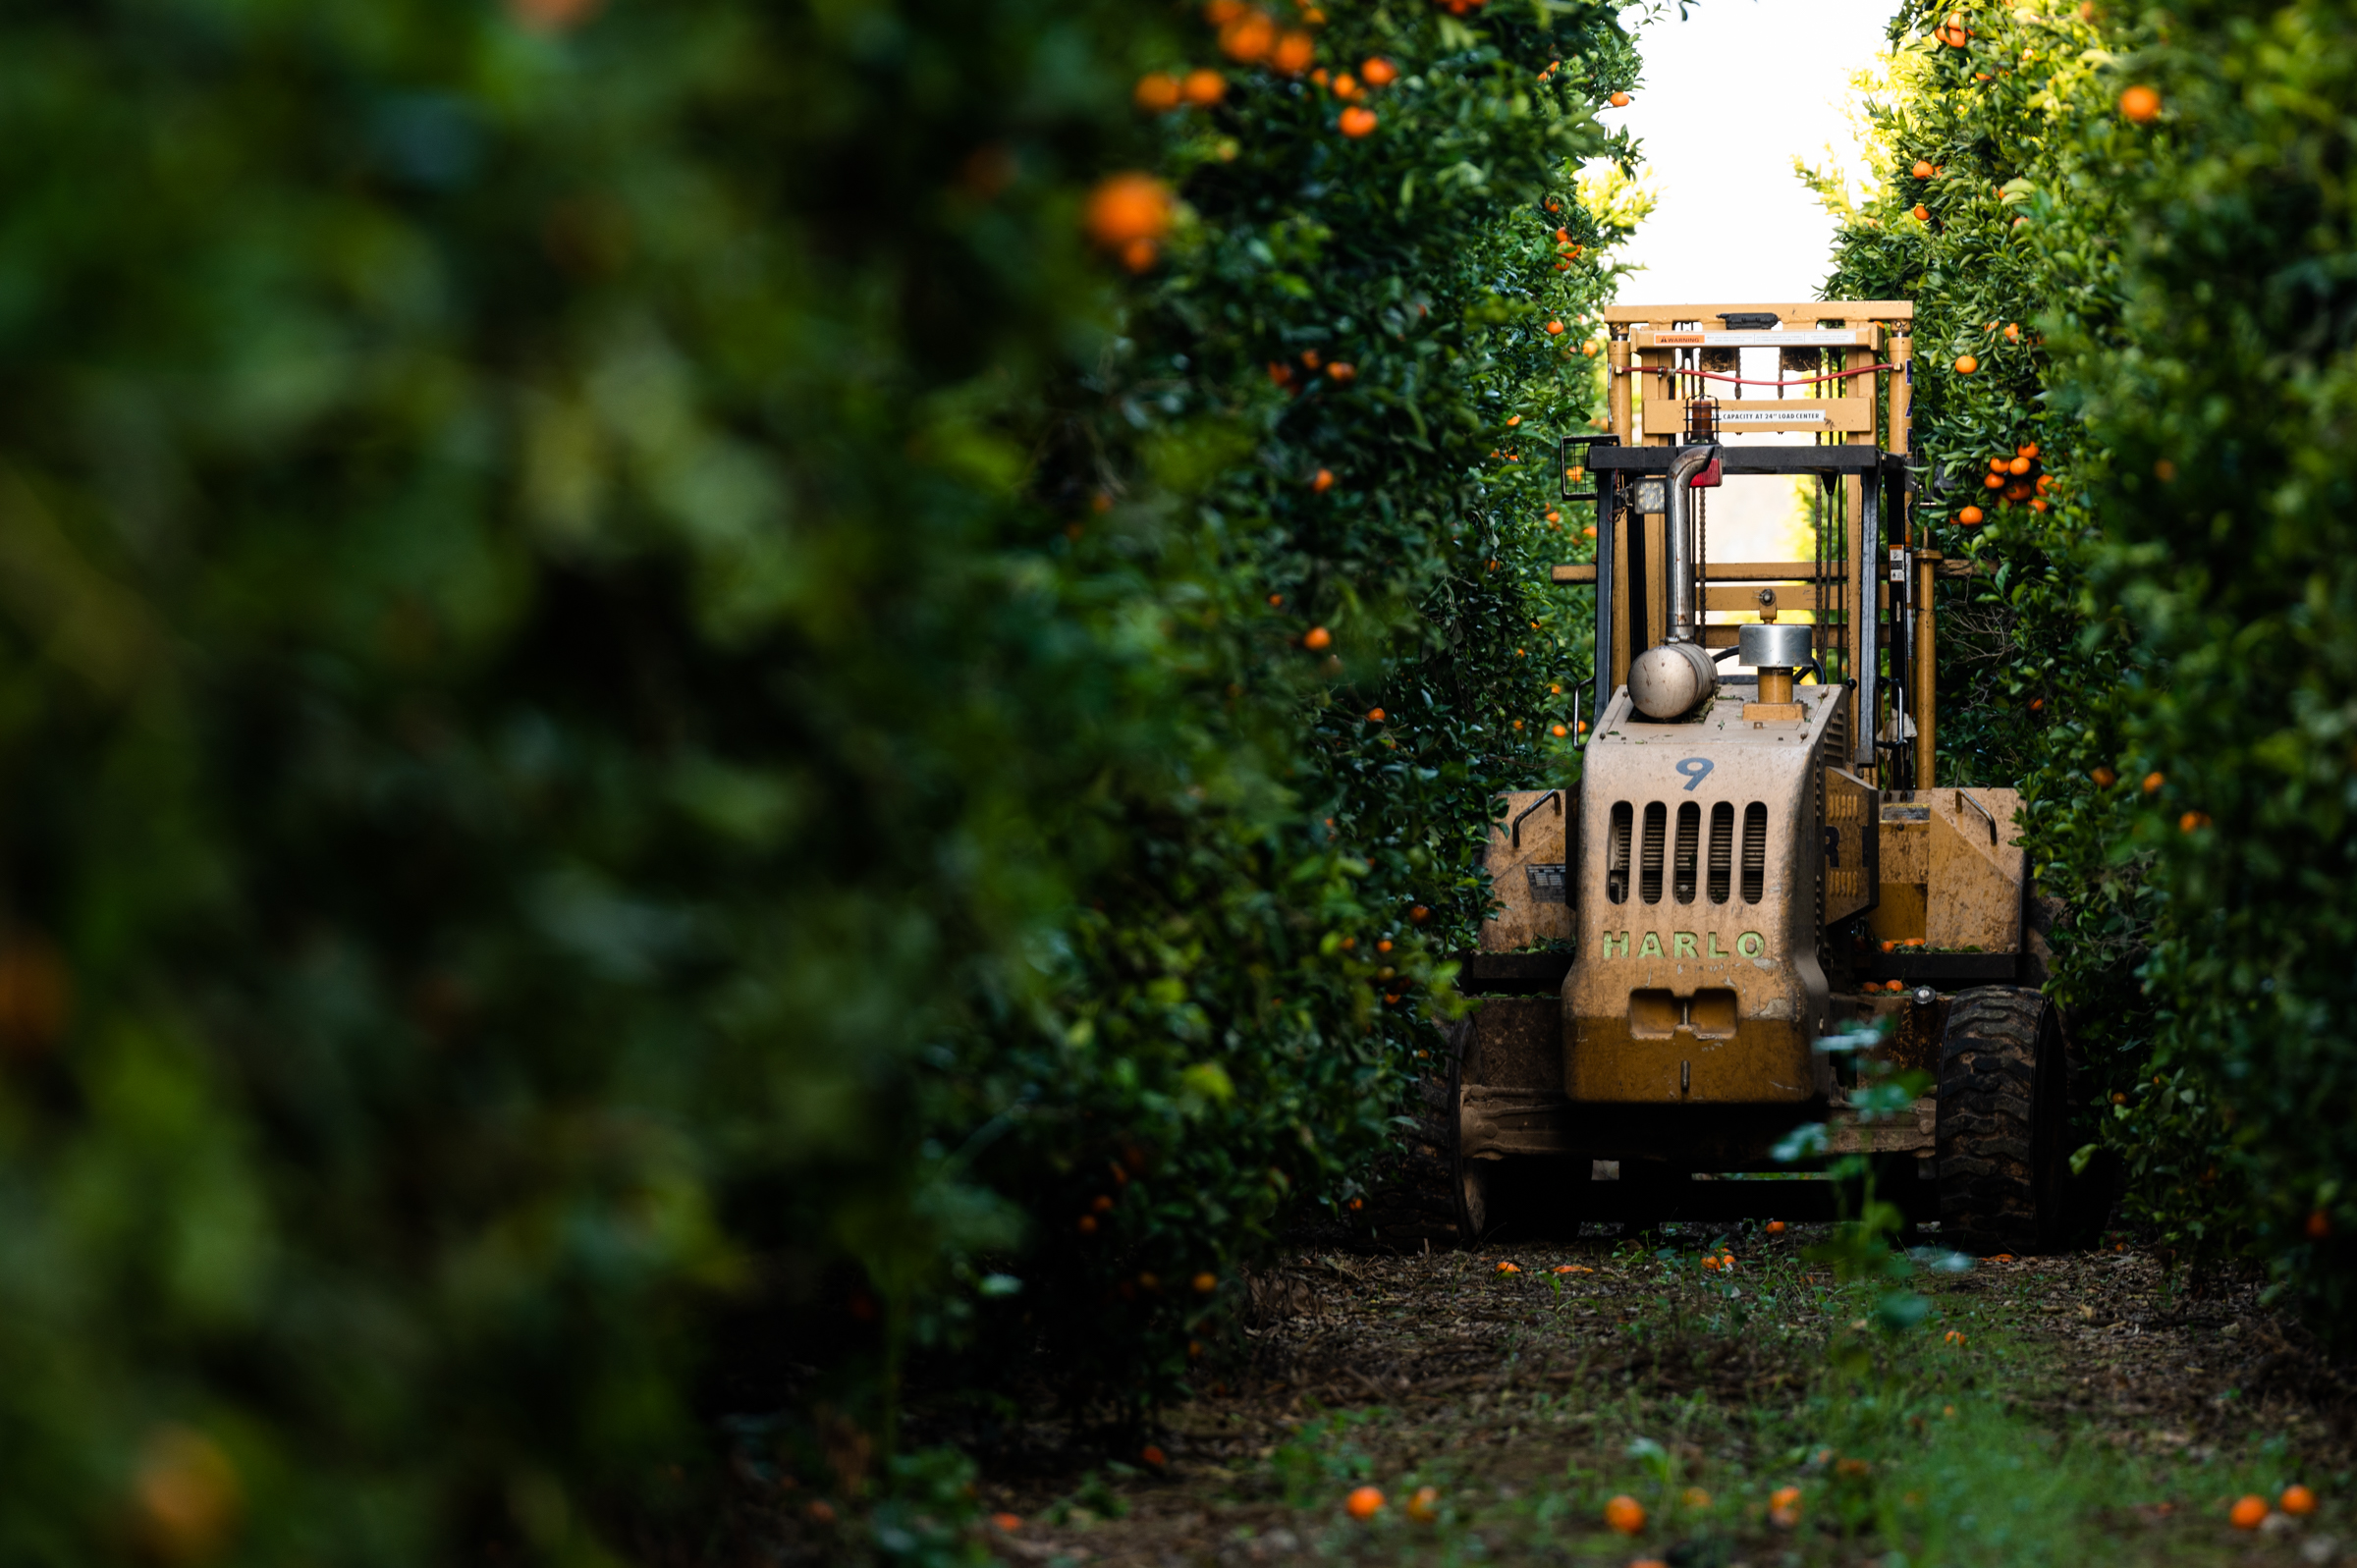 A forklift used for harvest parked in between rows of citrus trees